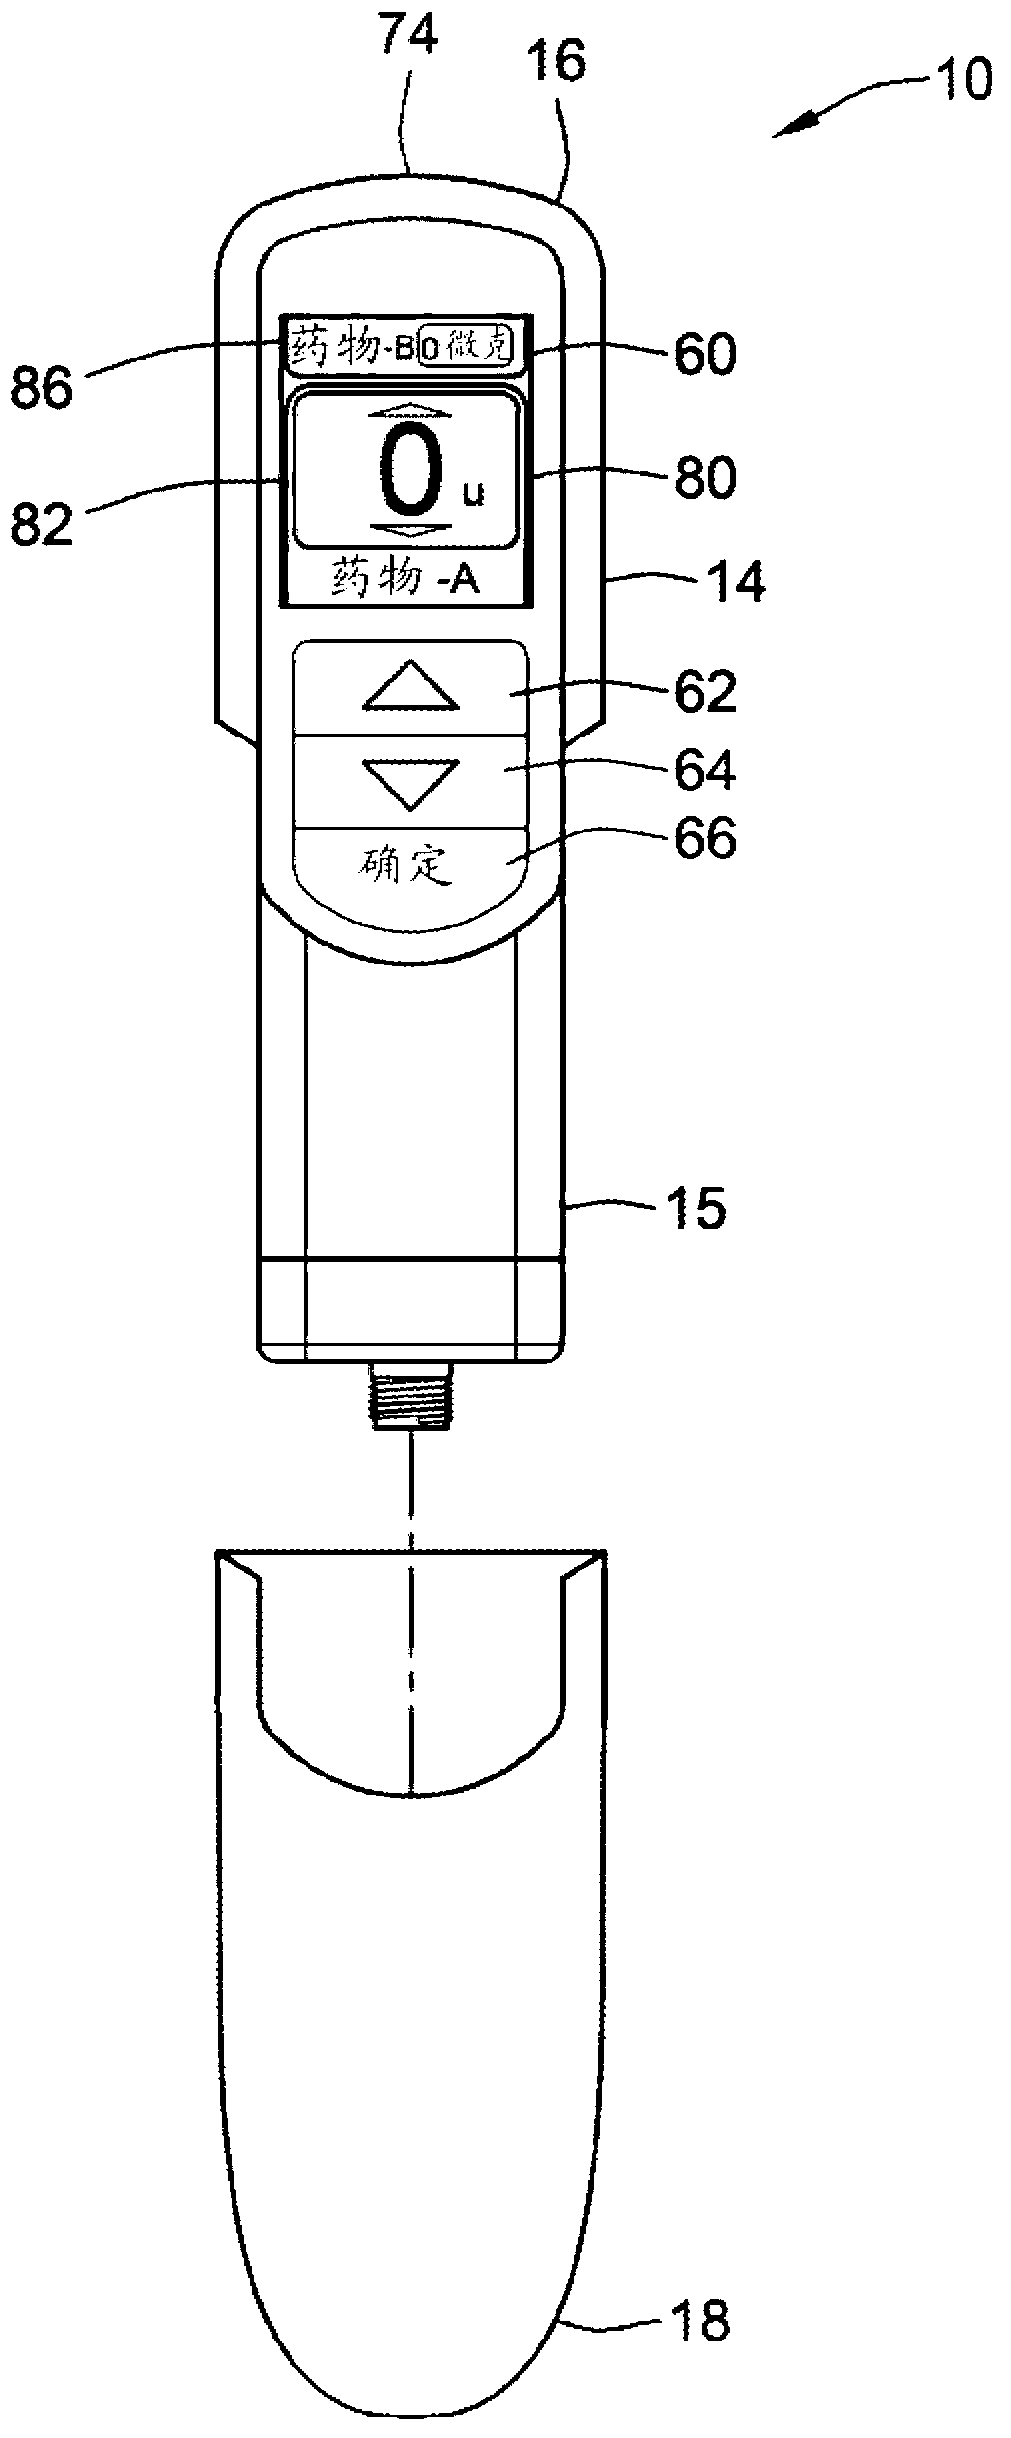 Device and method for delivery of two or more drug agents